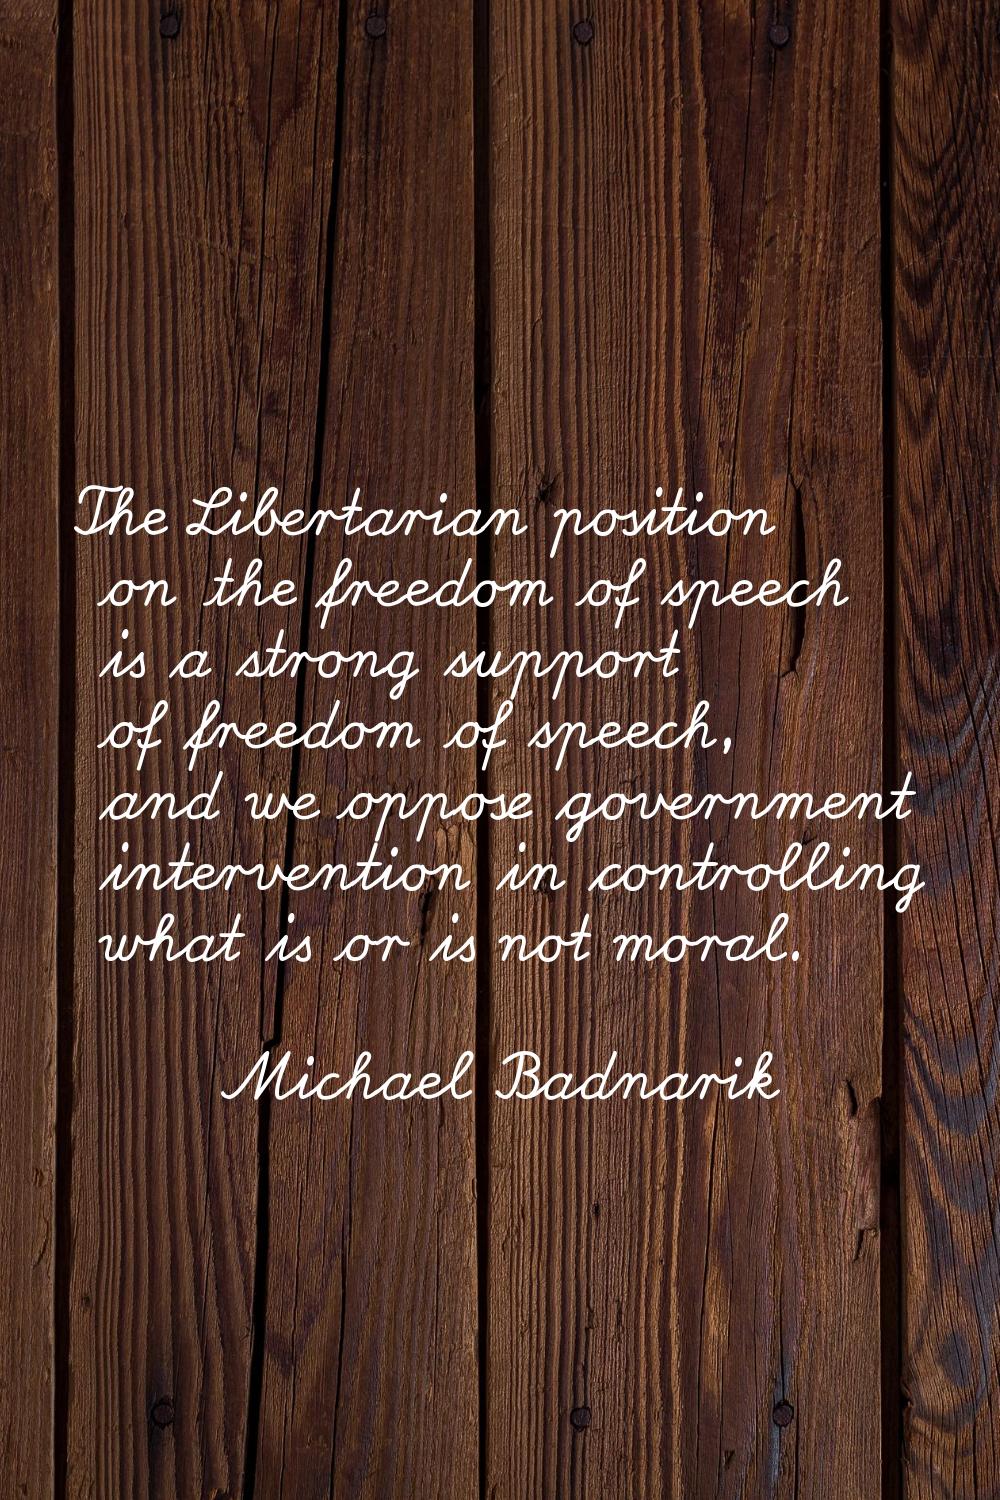 The Libertarian position on the freedom of speech is a strong support of freedom of speech, and we 